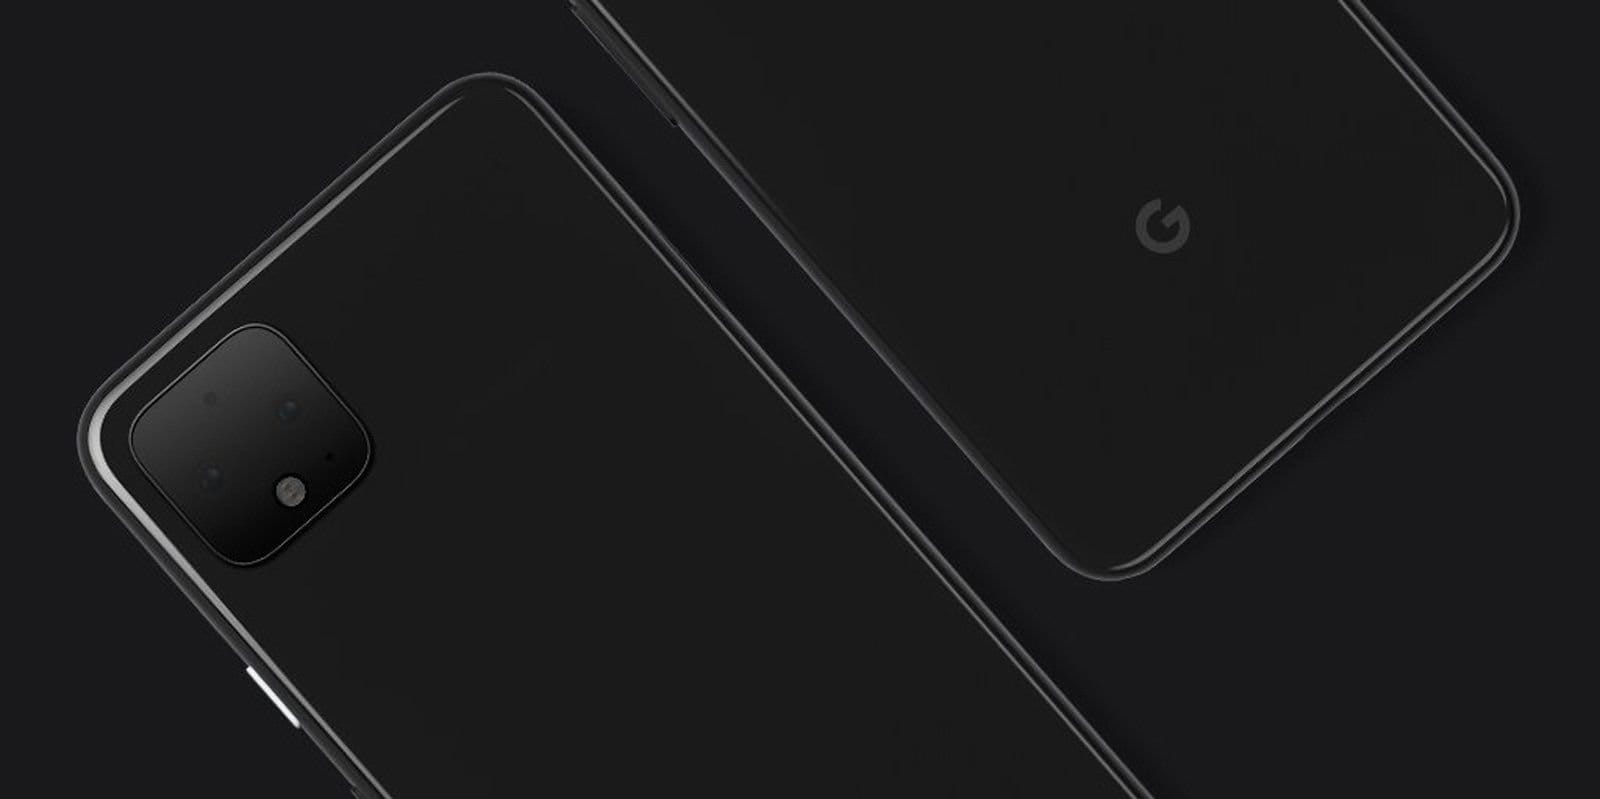 Google S Pixel 4 May Invoke Assistant When You Raise The Phone